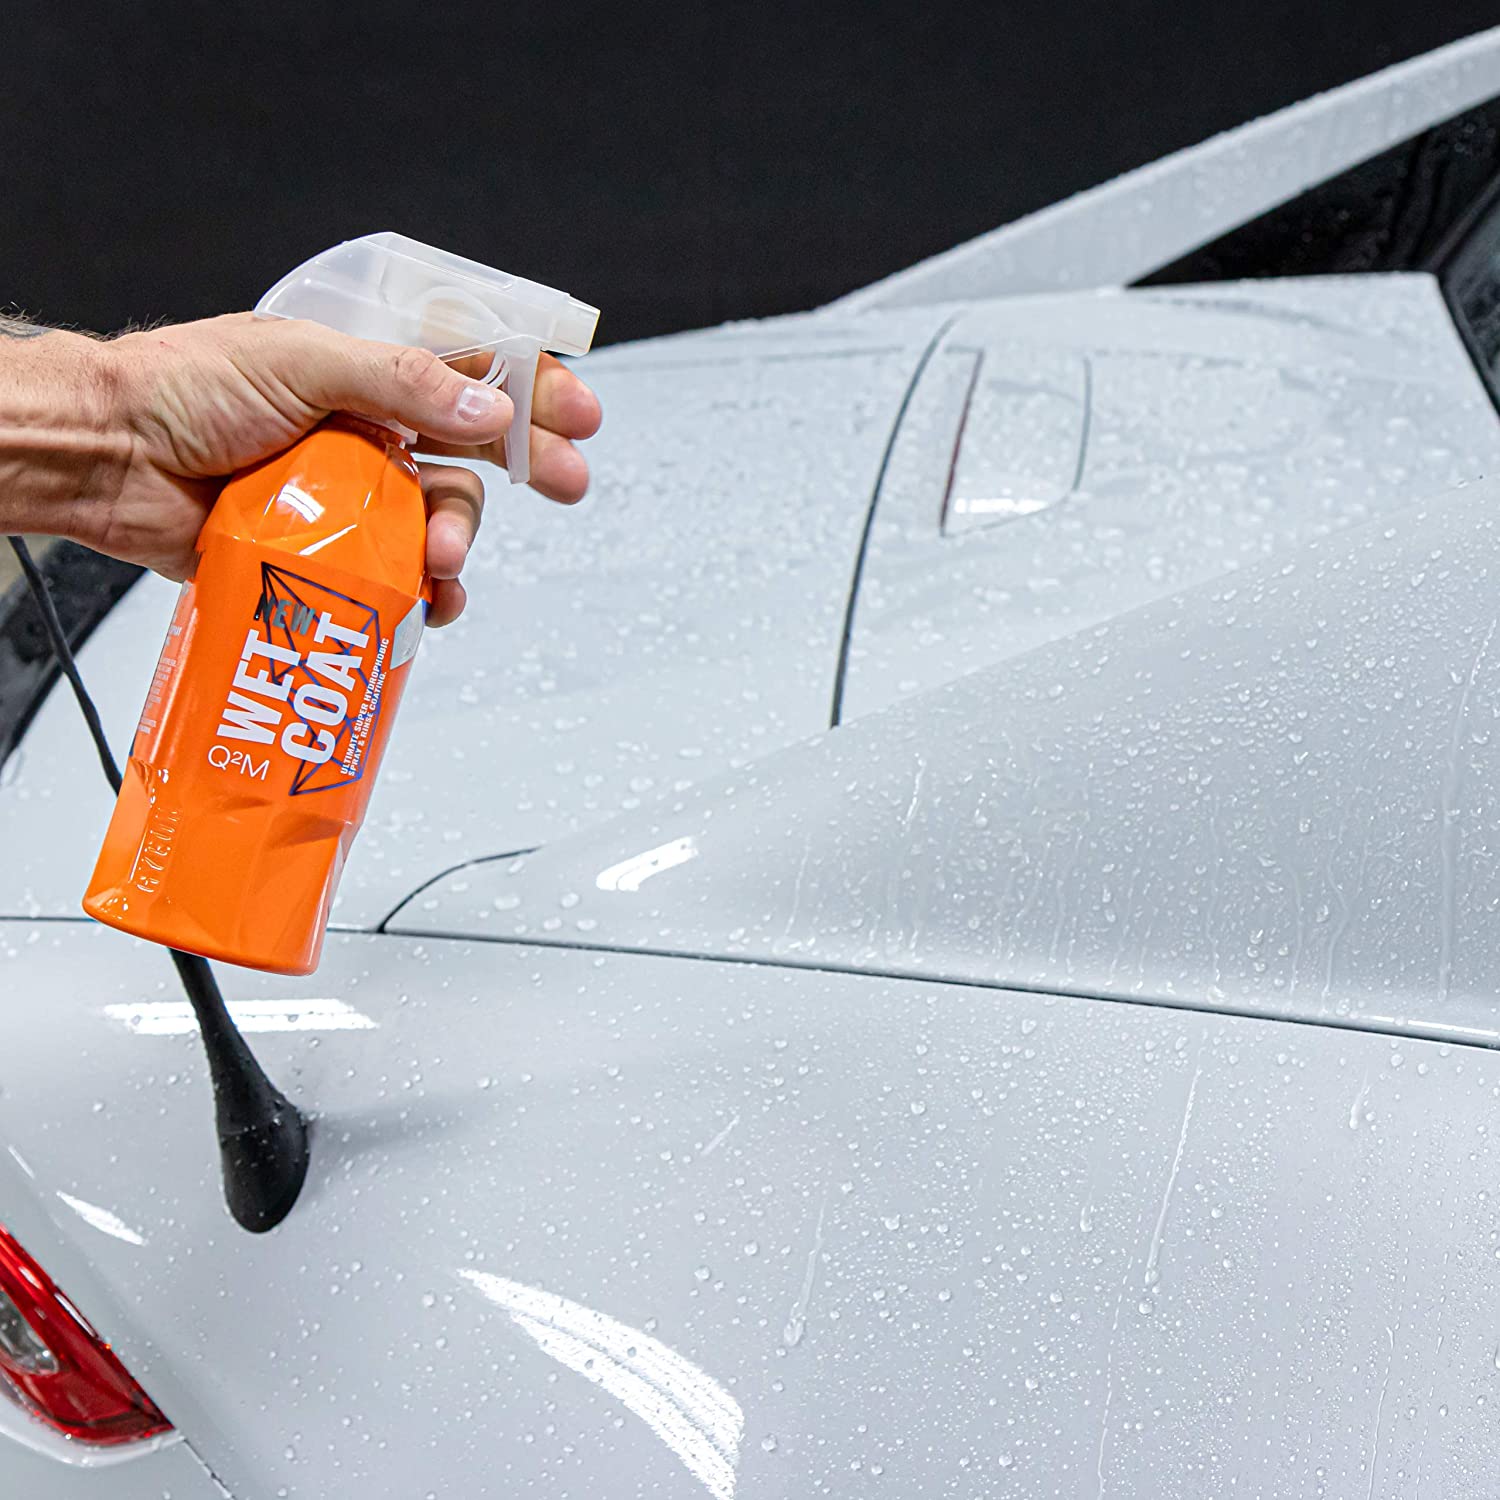 Q²M WetCoat Essence, Q²M WetCoat Essence - Instant spray & rinse sealant  that you can dilute to your needs - it will boost gloss and add awesome  water repellency. Check it